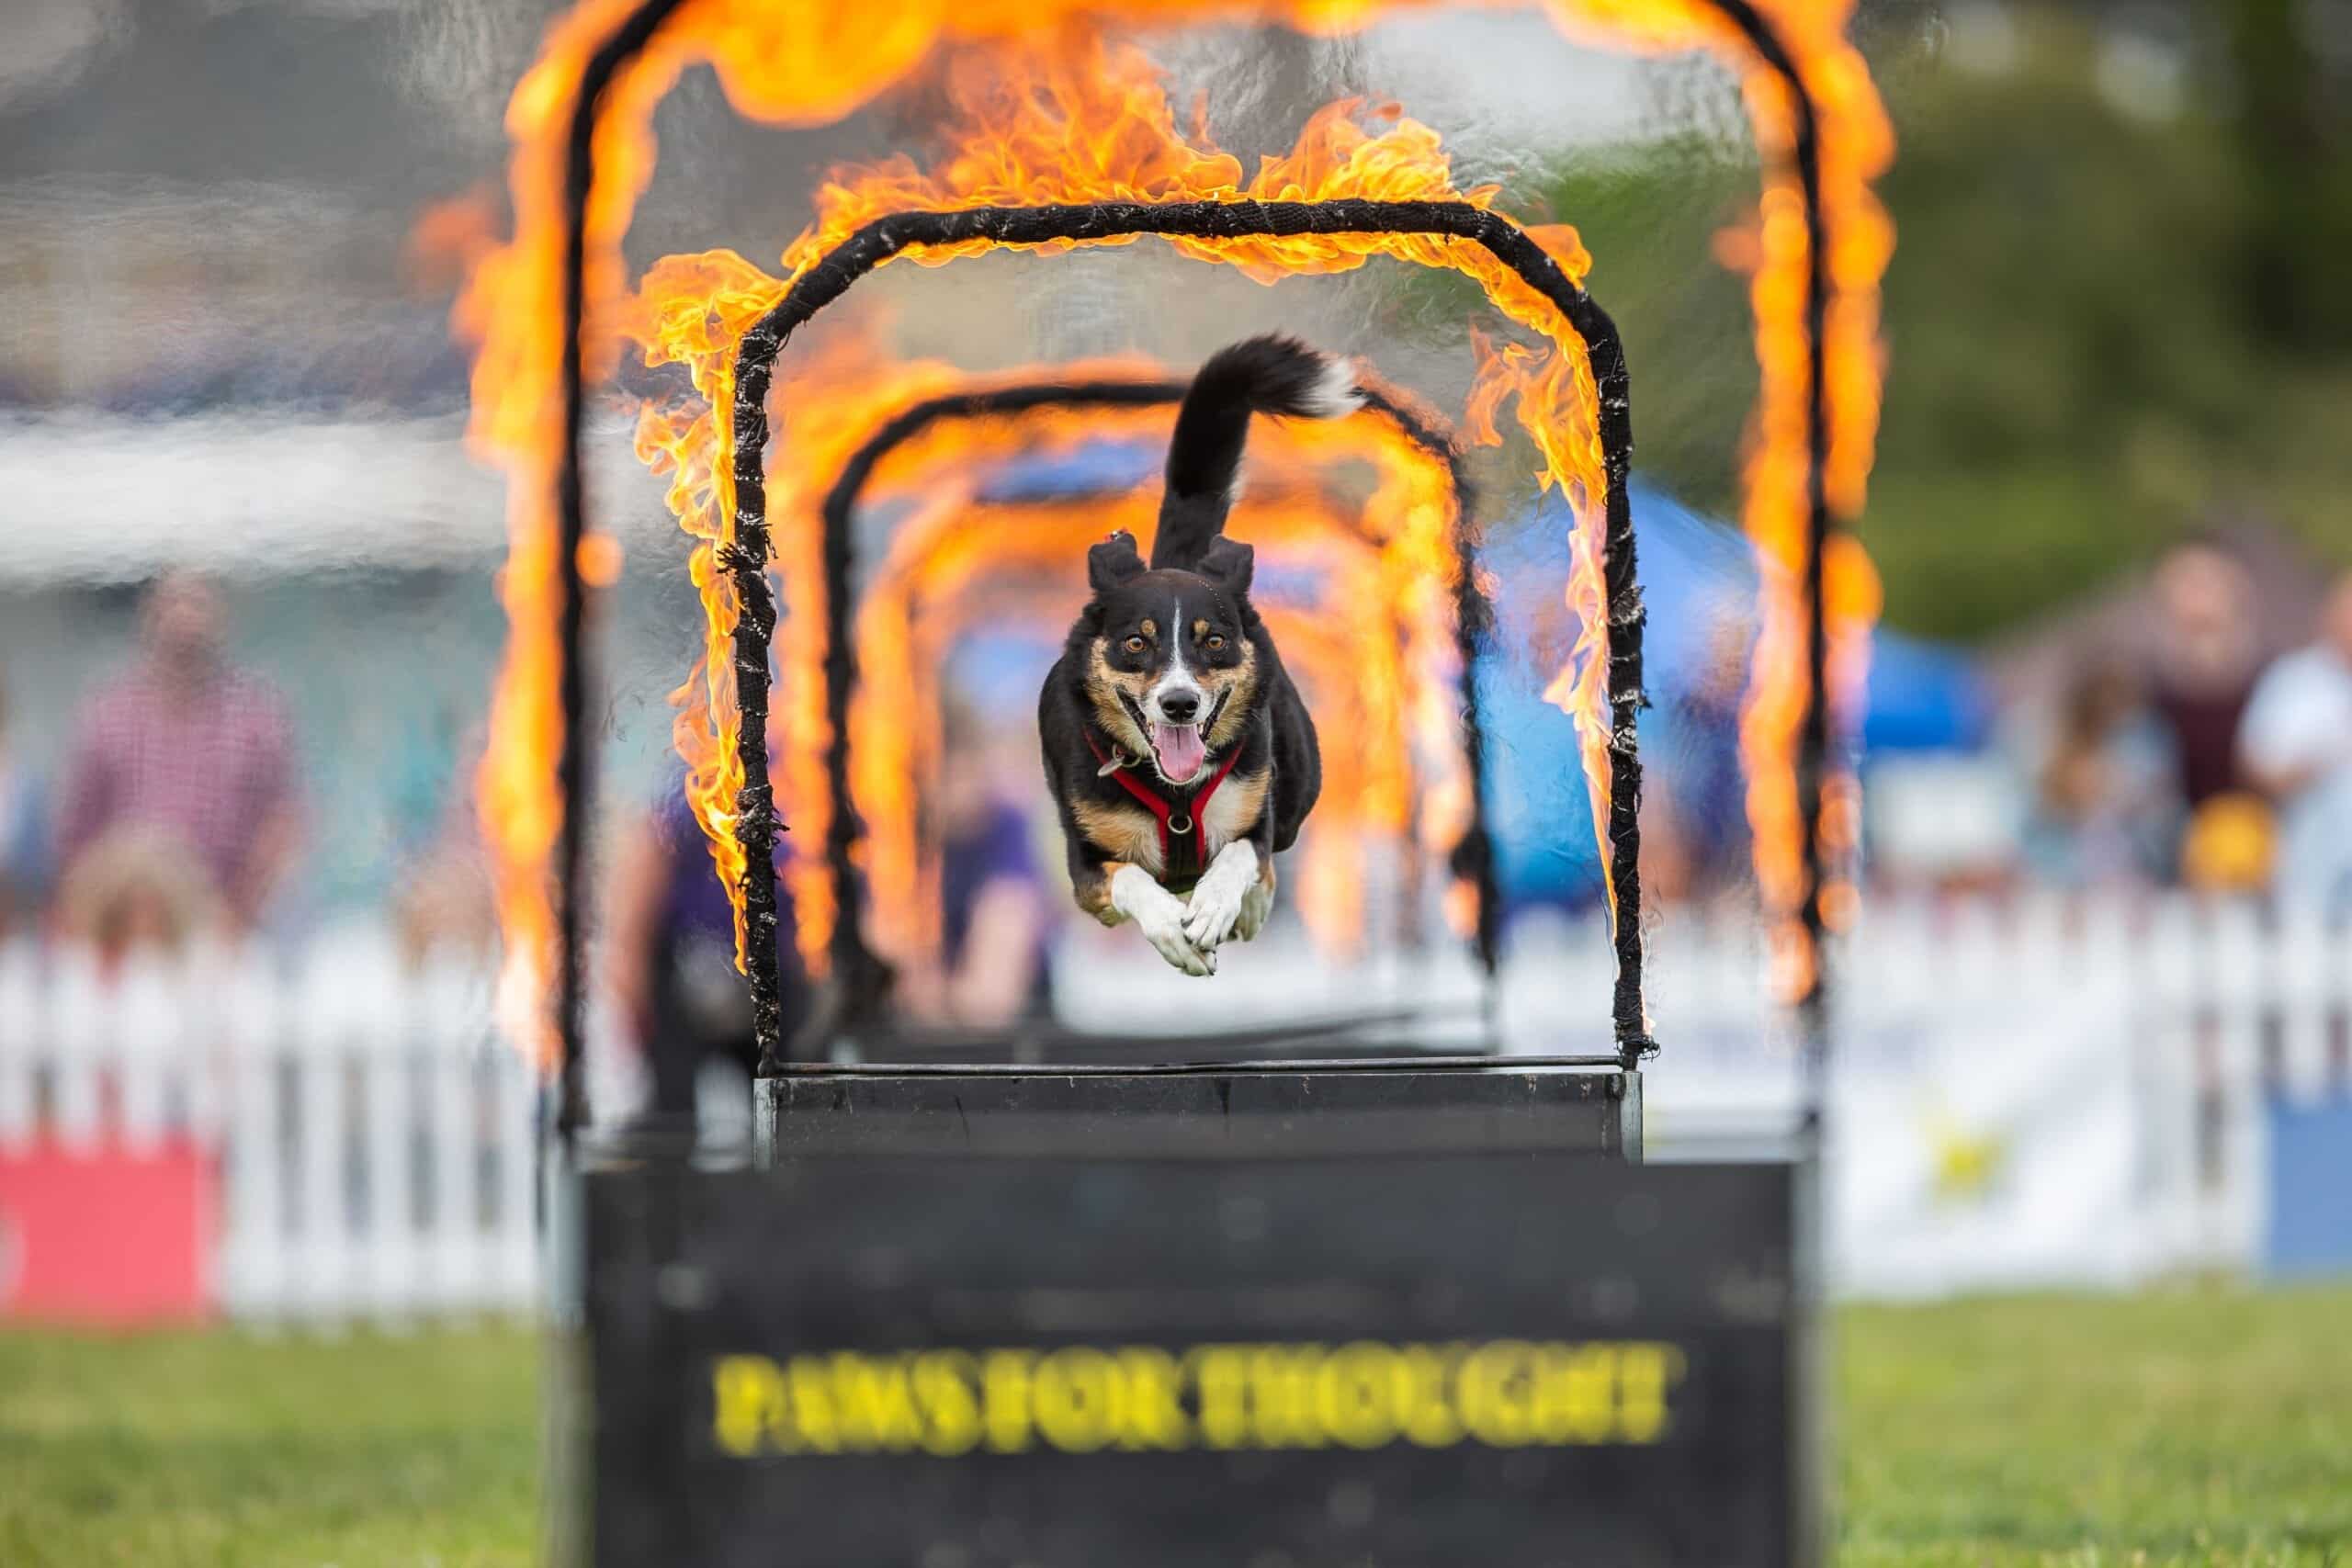 Dog jumping through rings of fire, dog festival